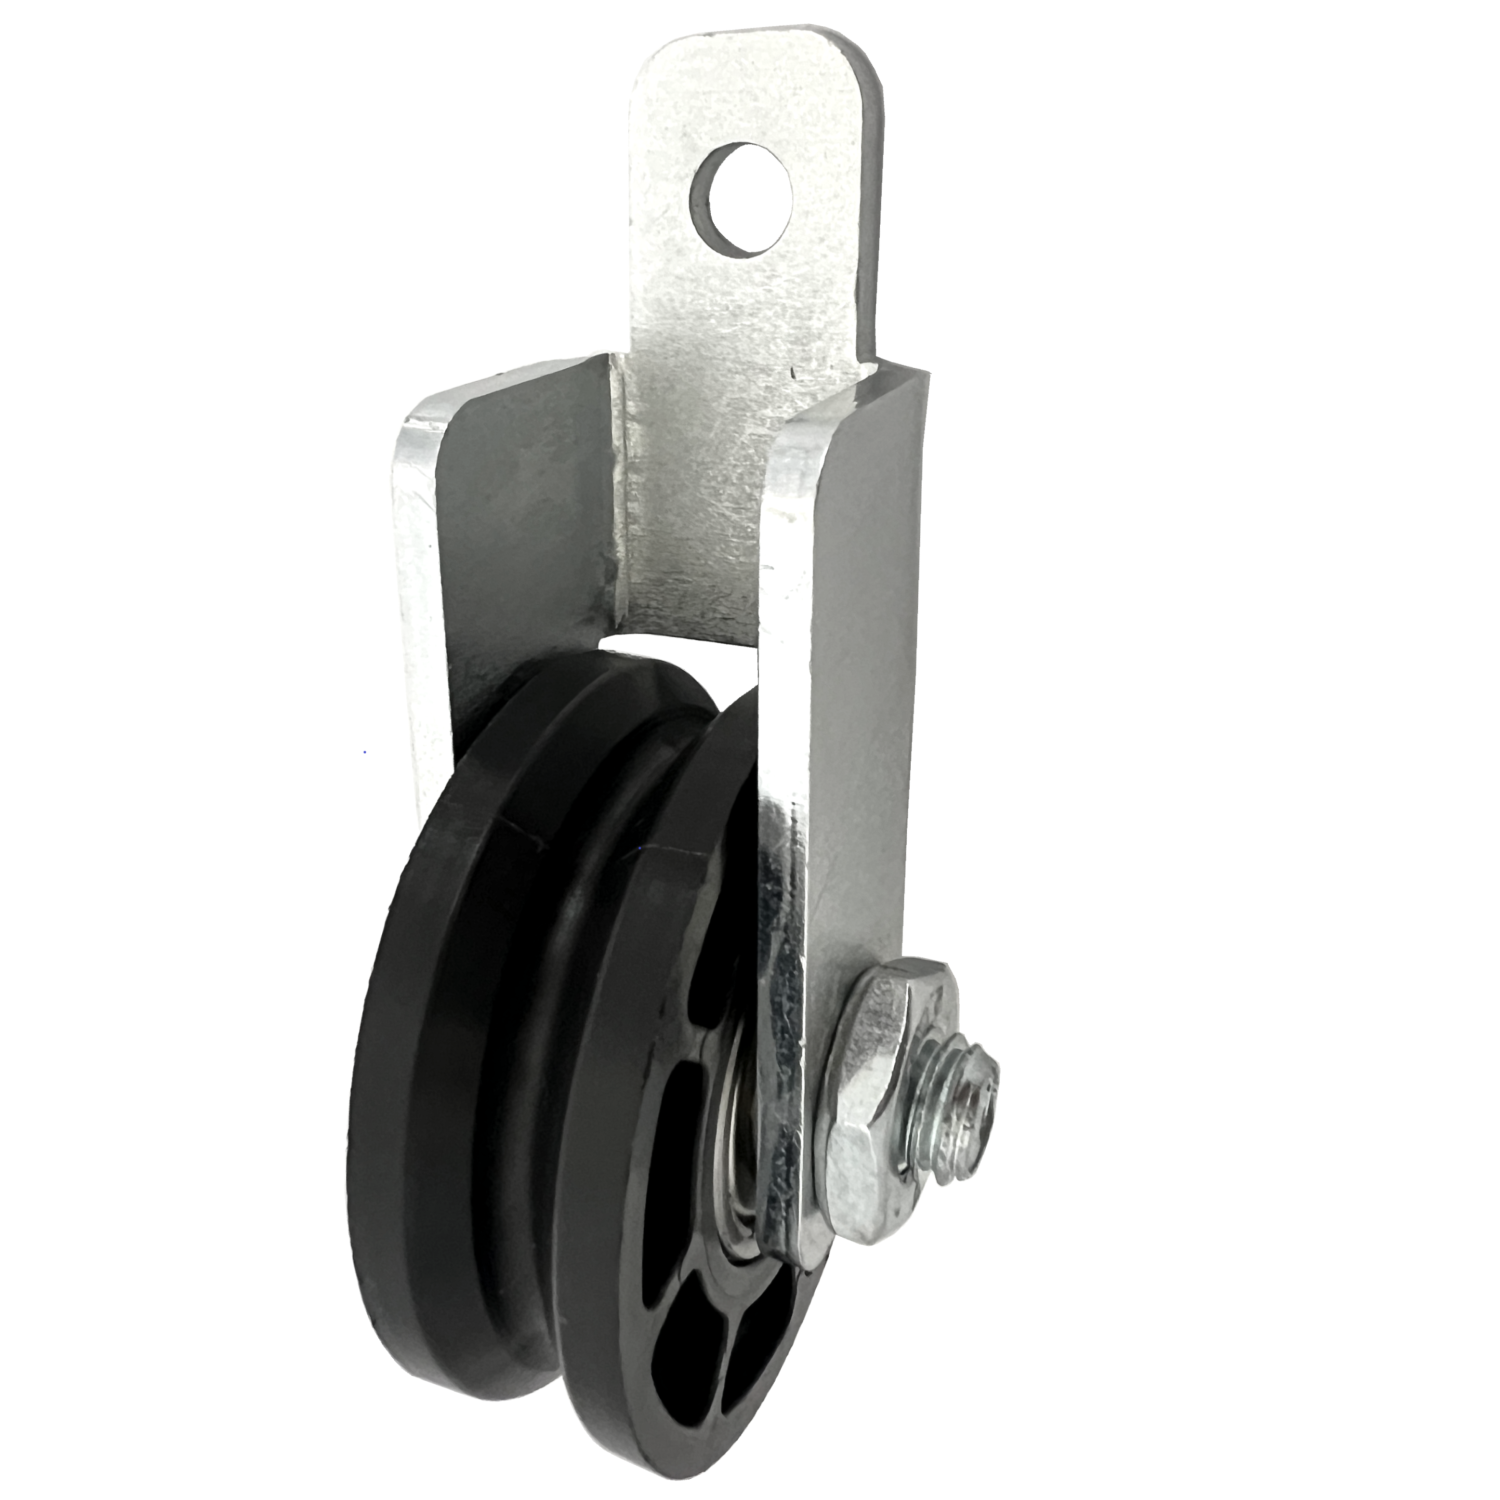 Cable pulley 52/4 mm with holder for lifting / lowering heater - PU = 1 pcs